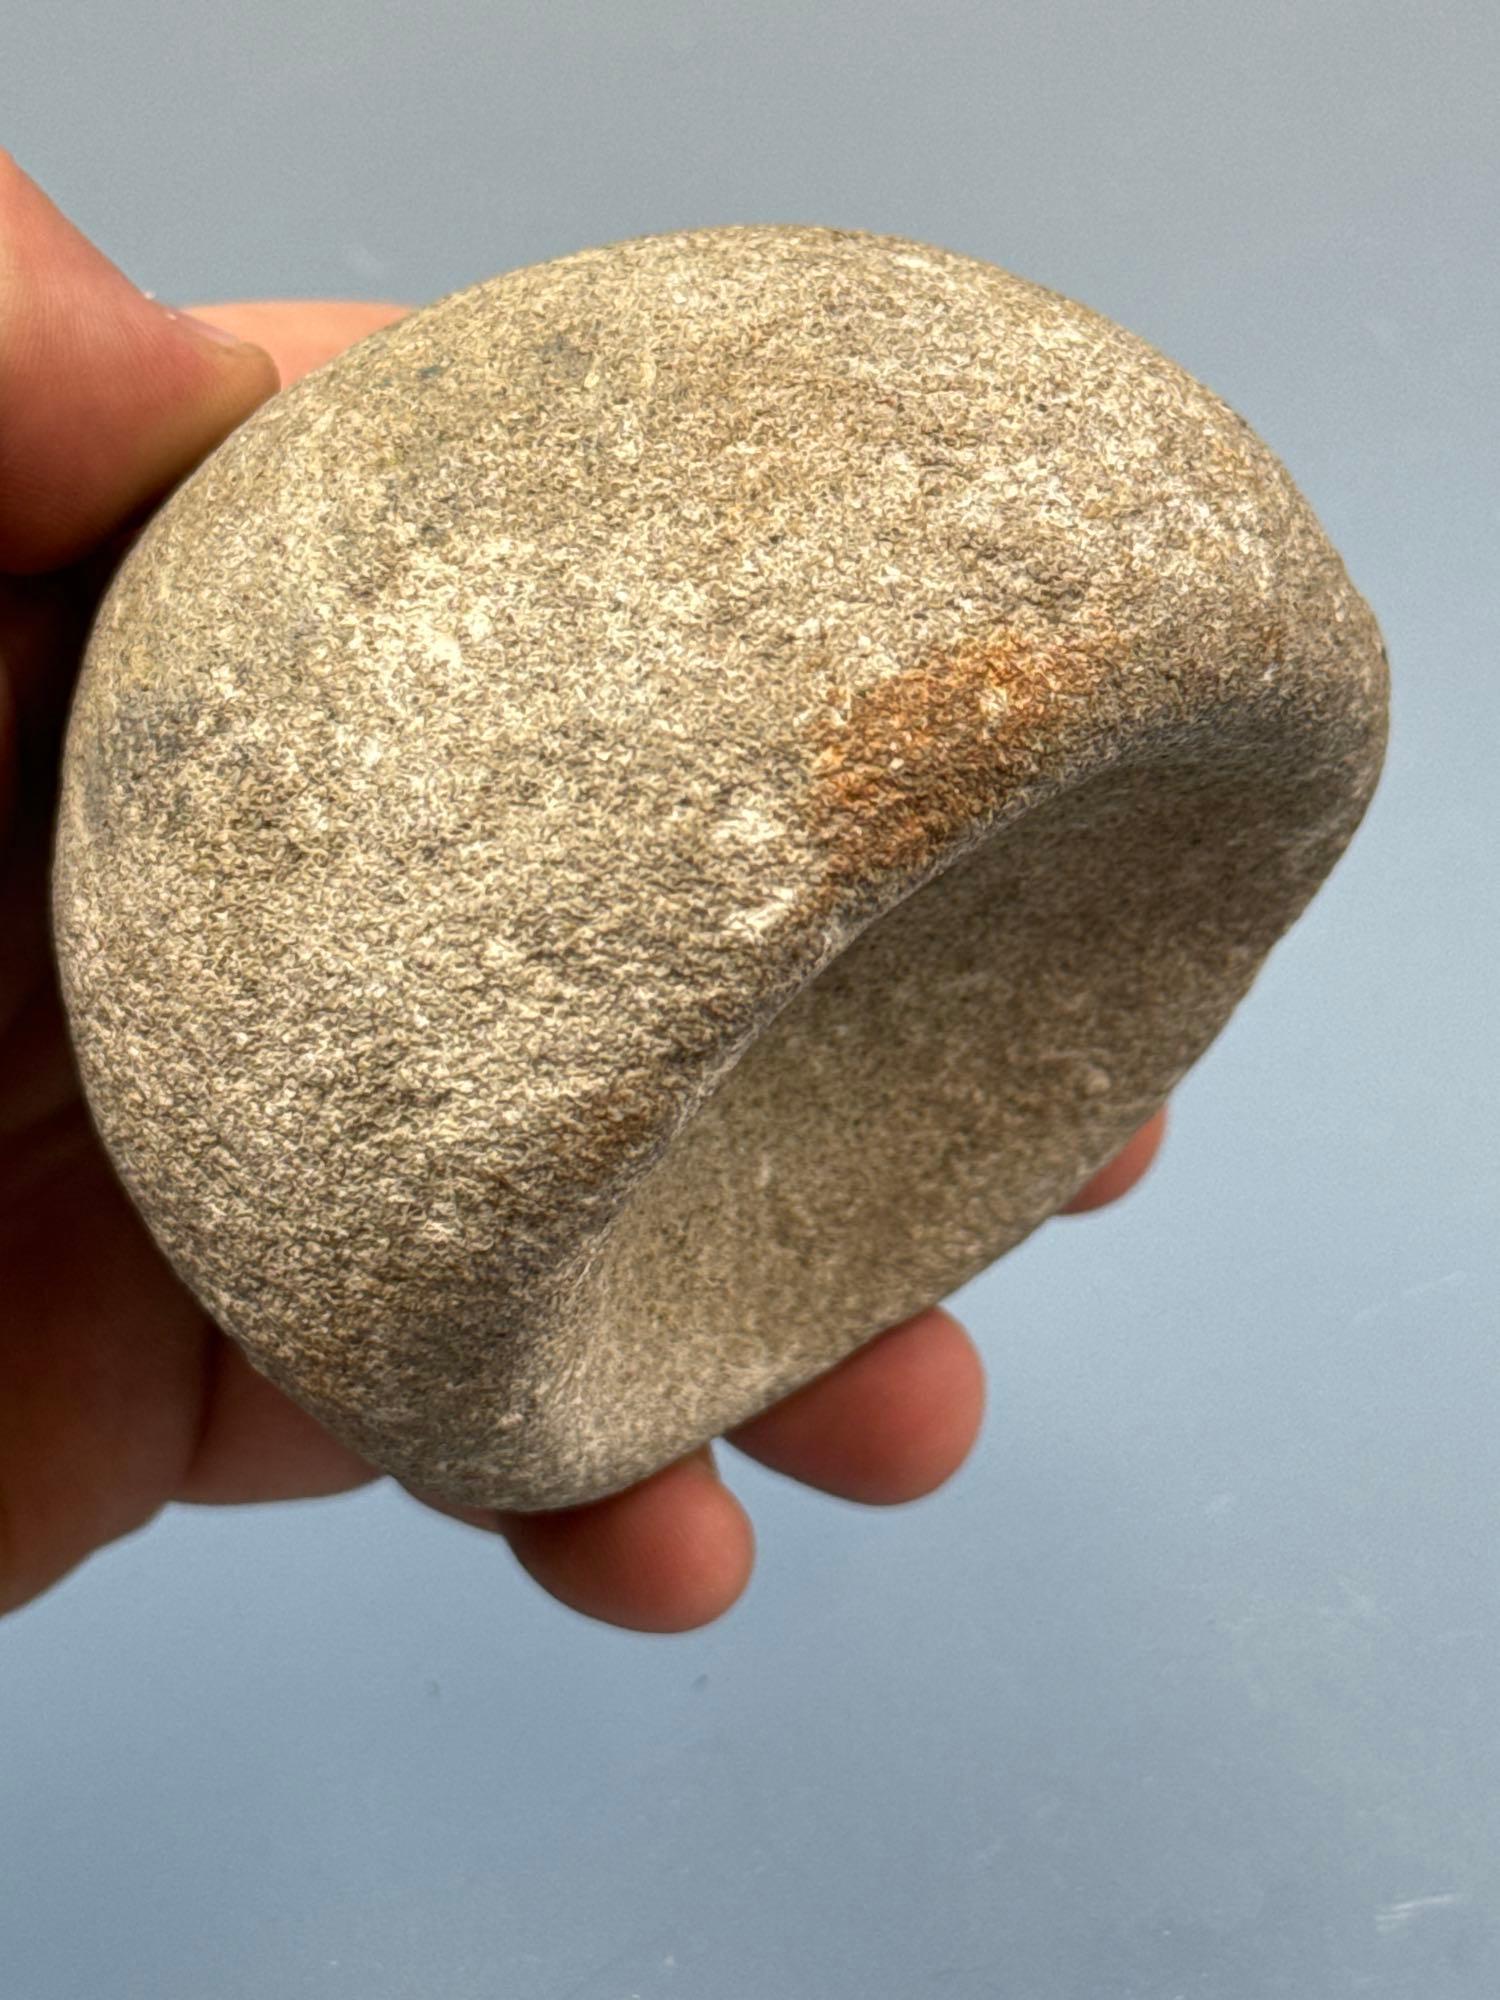 3" x 2 5/8" Stone Mortar, Found in Burlington Co., New Jersey, Nicely Made